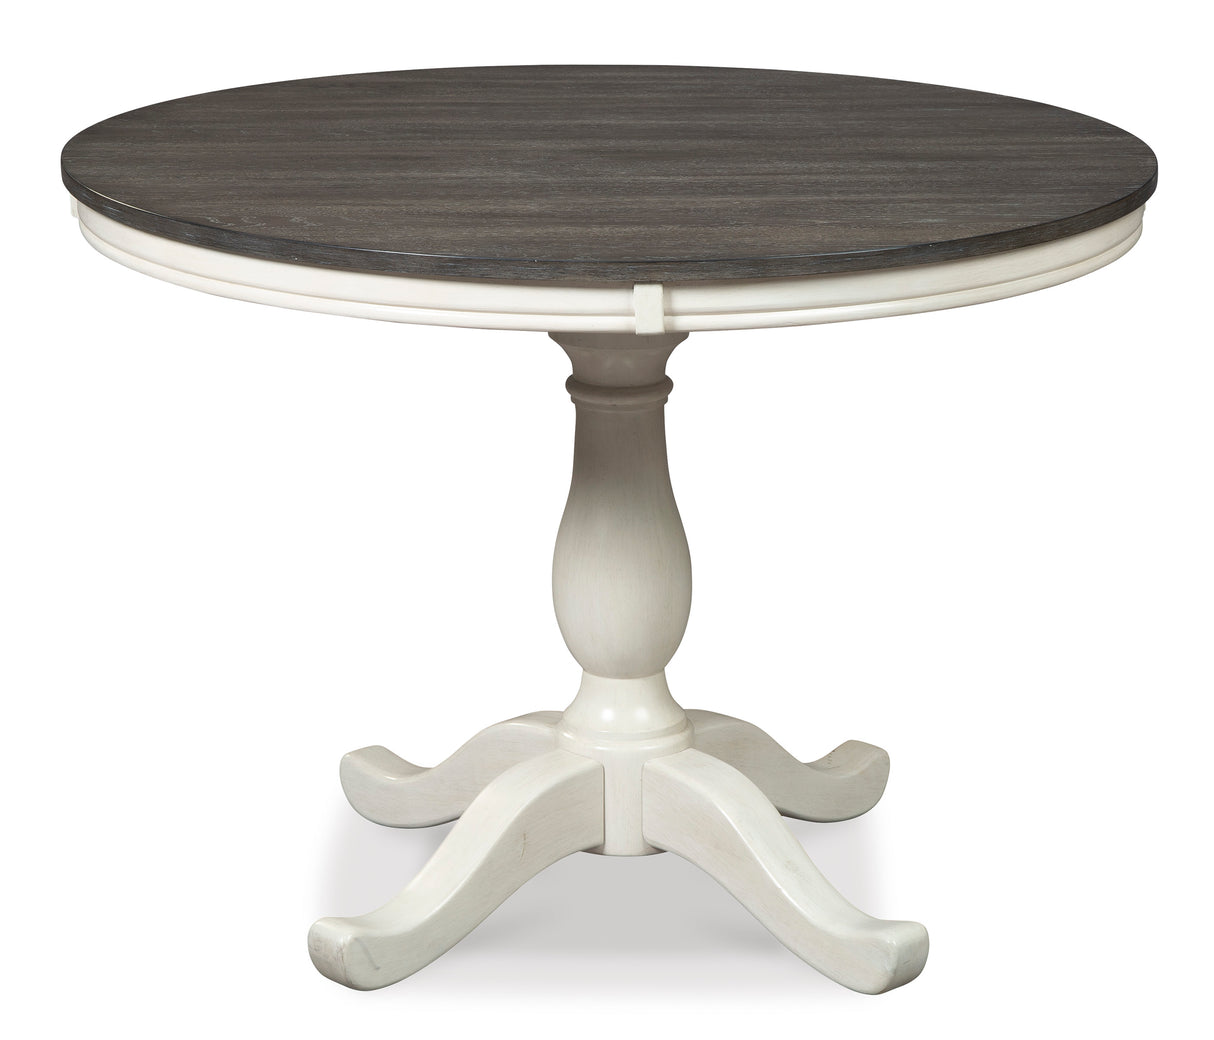 Nelling Two-tone Round Dining Set